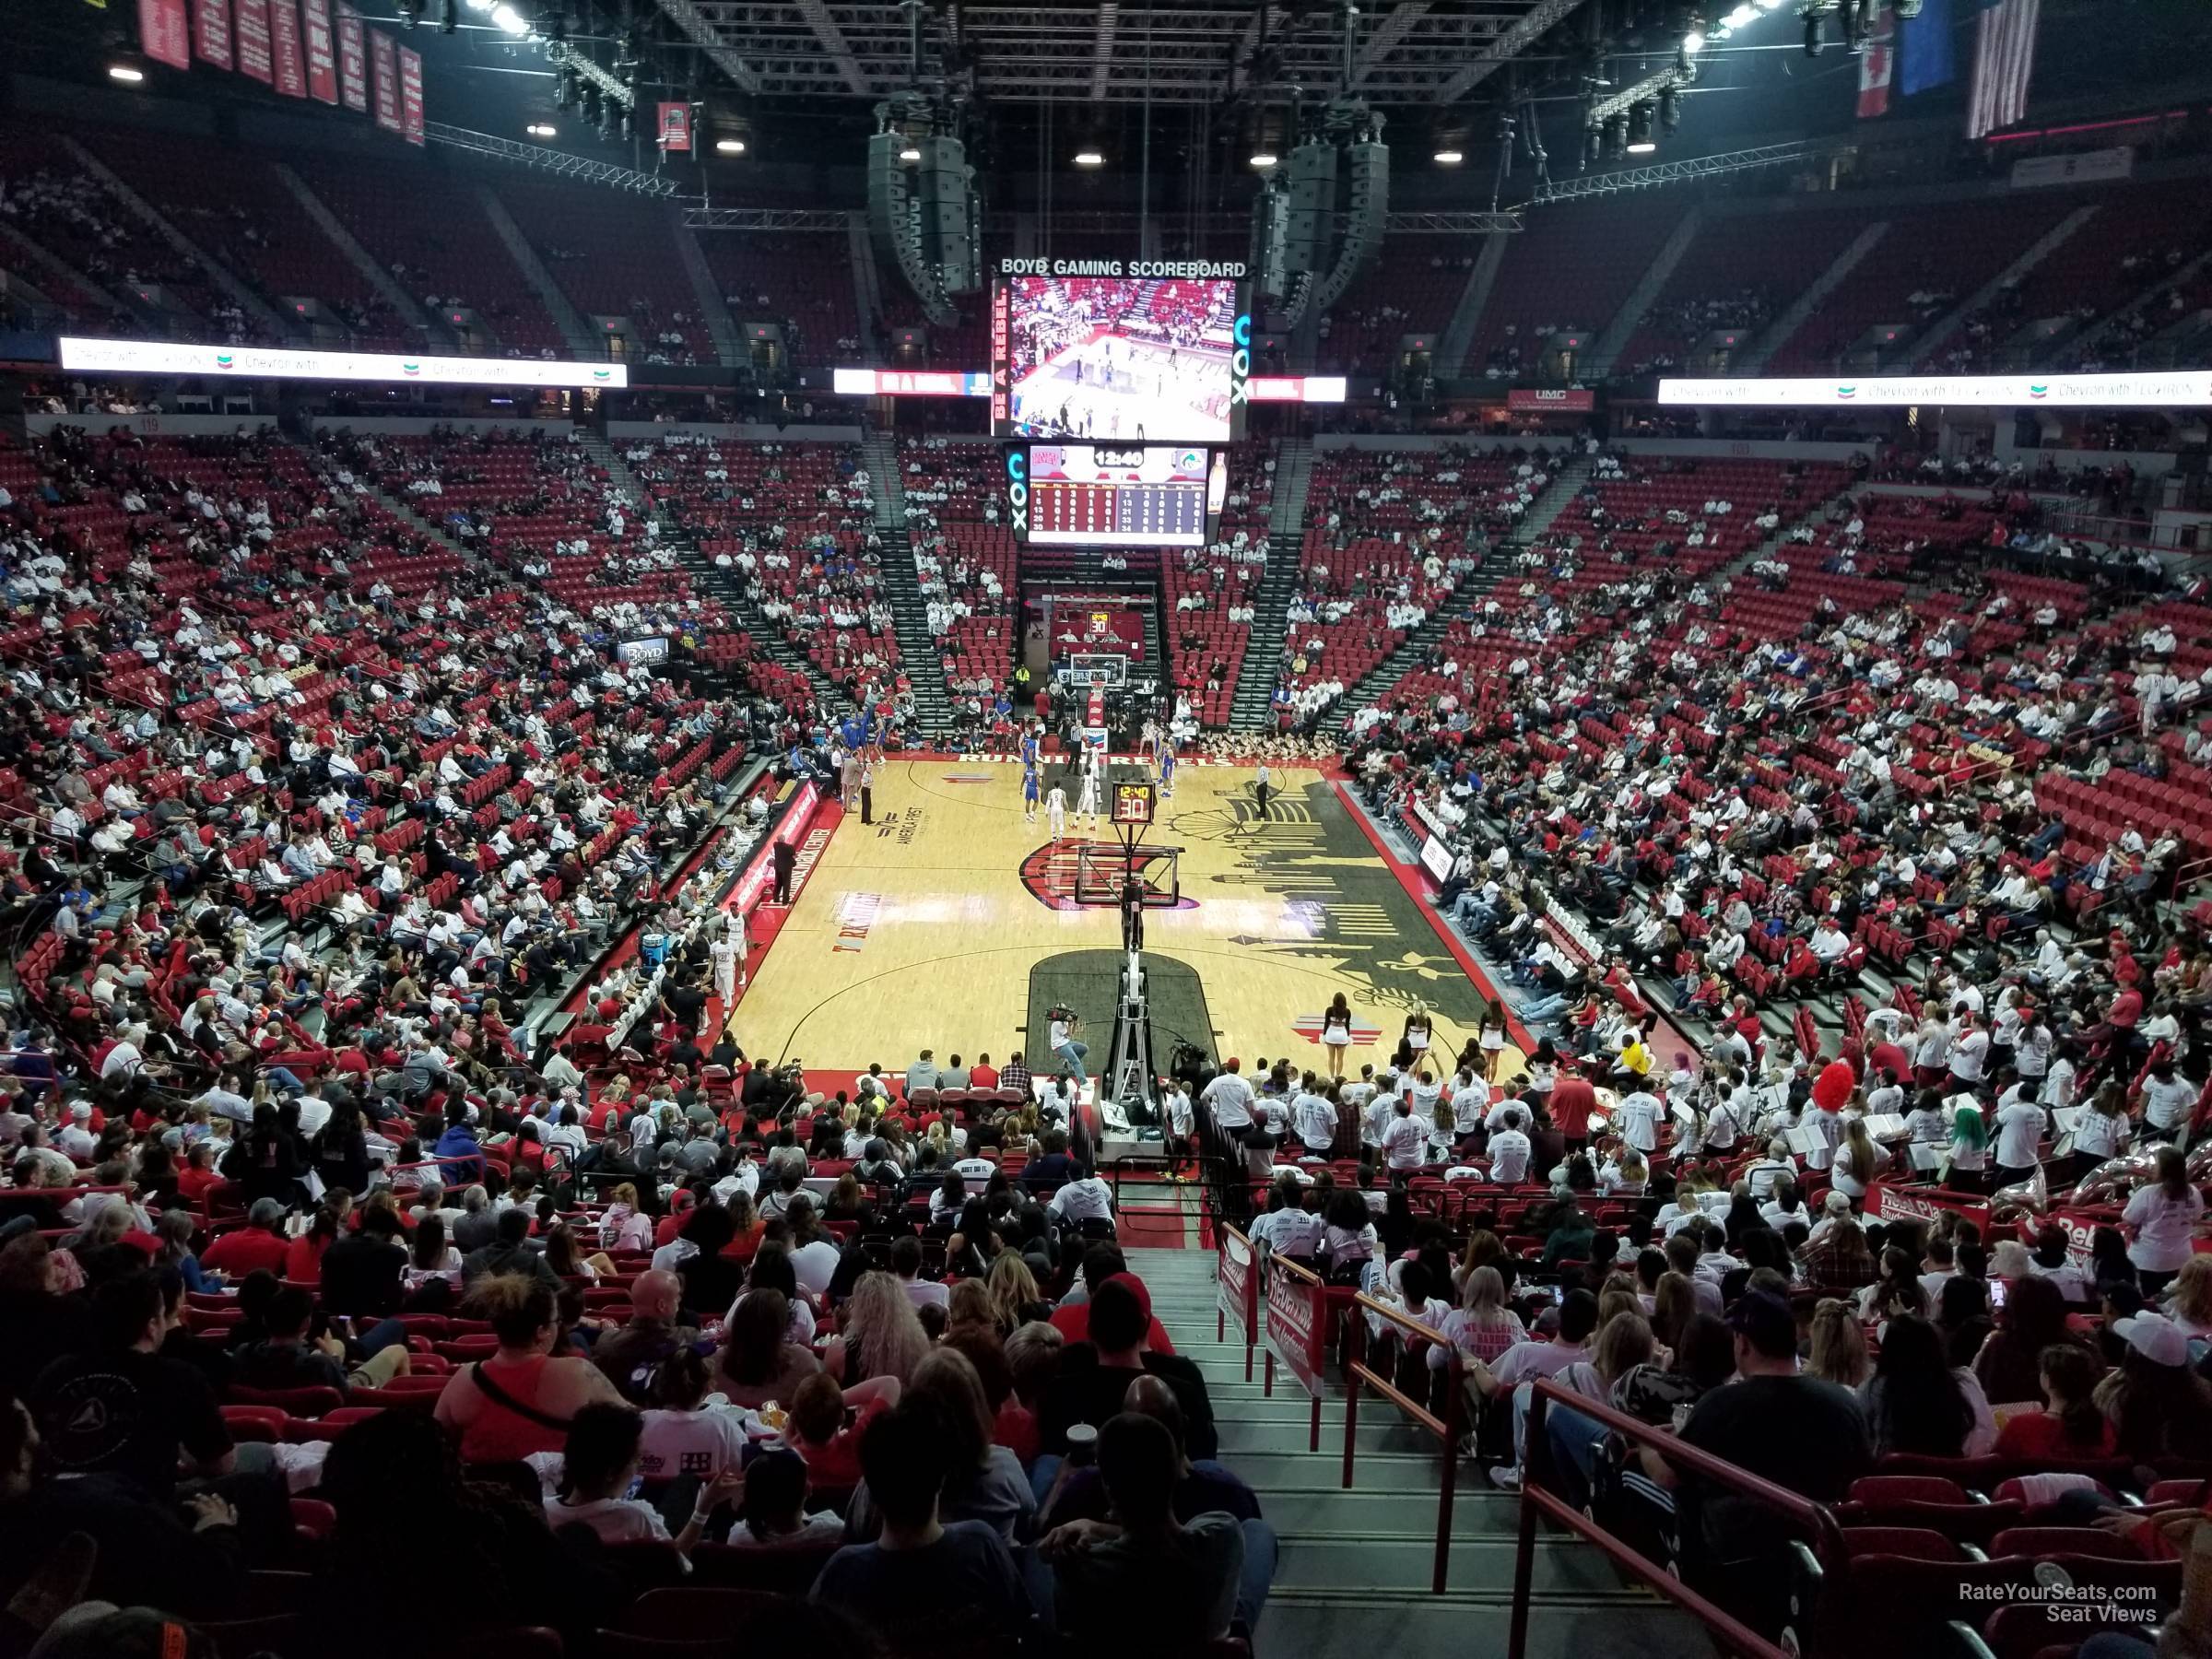 section 112, row x seat view  - thomas and mack center